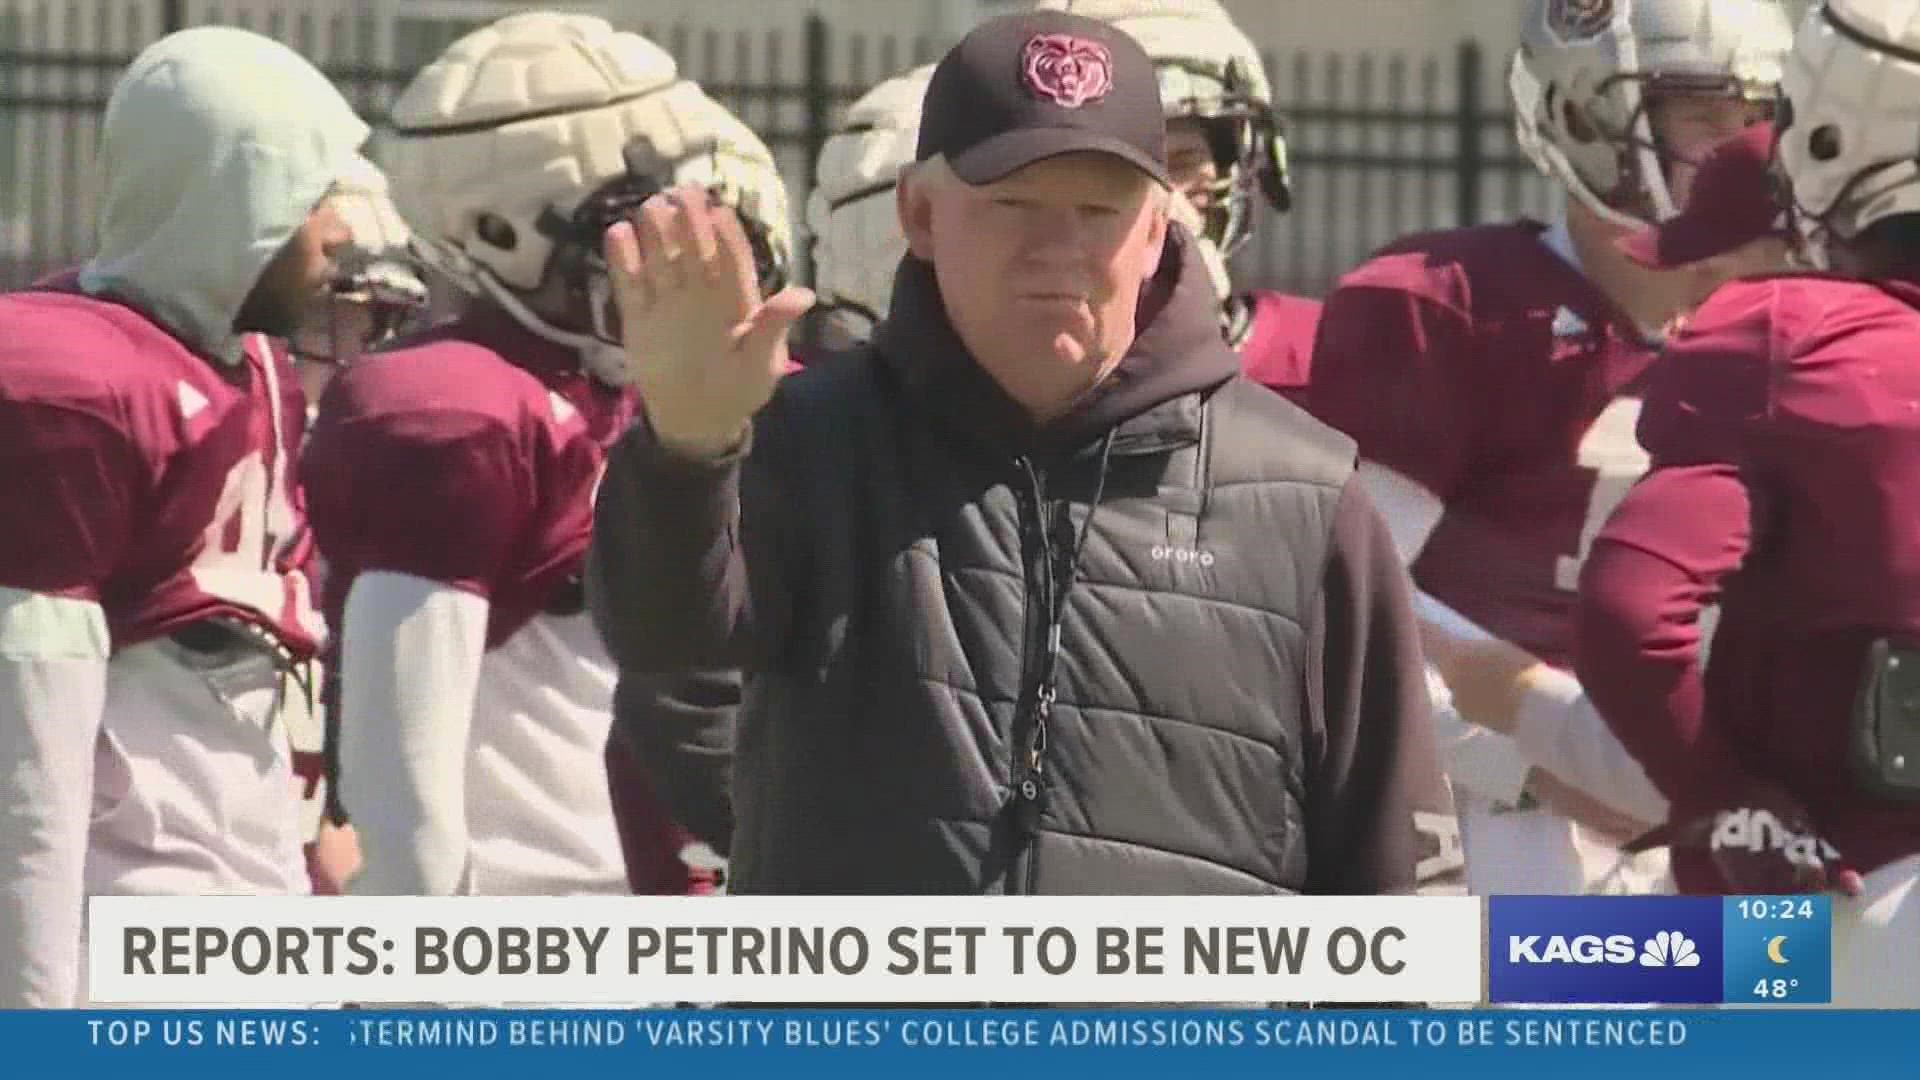 According to multiple reports, Bobby Petrino will be the Aggies new offensive coordinator. This will be Petrino's 19th difference coaching job.